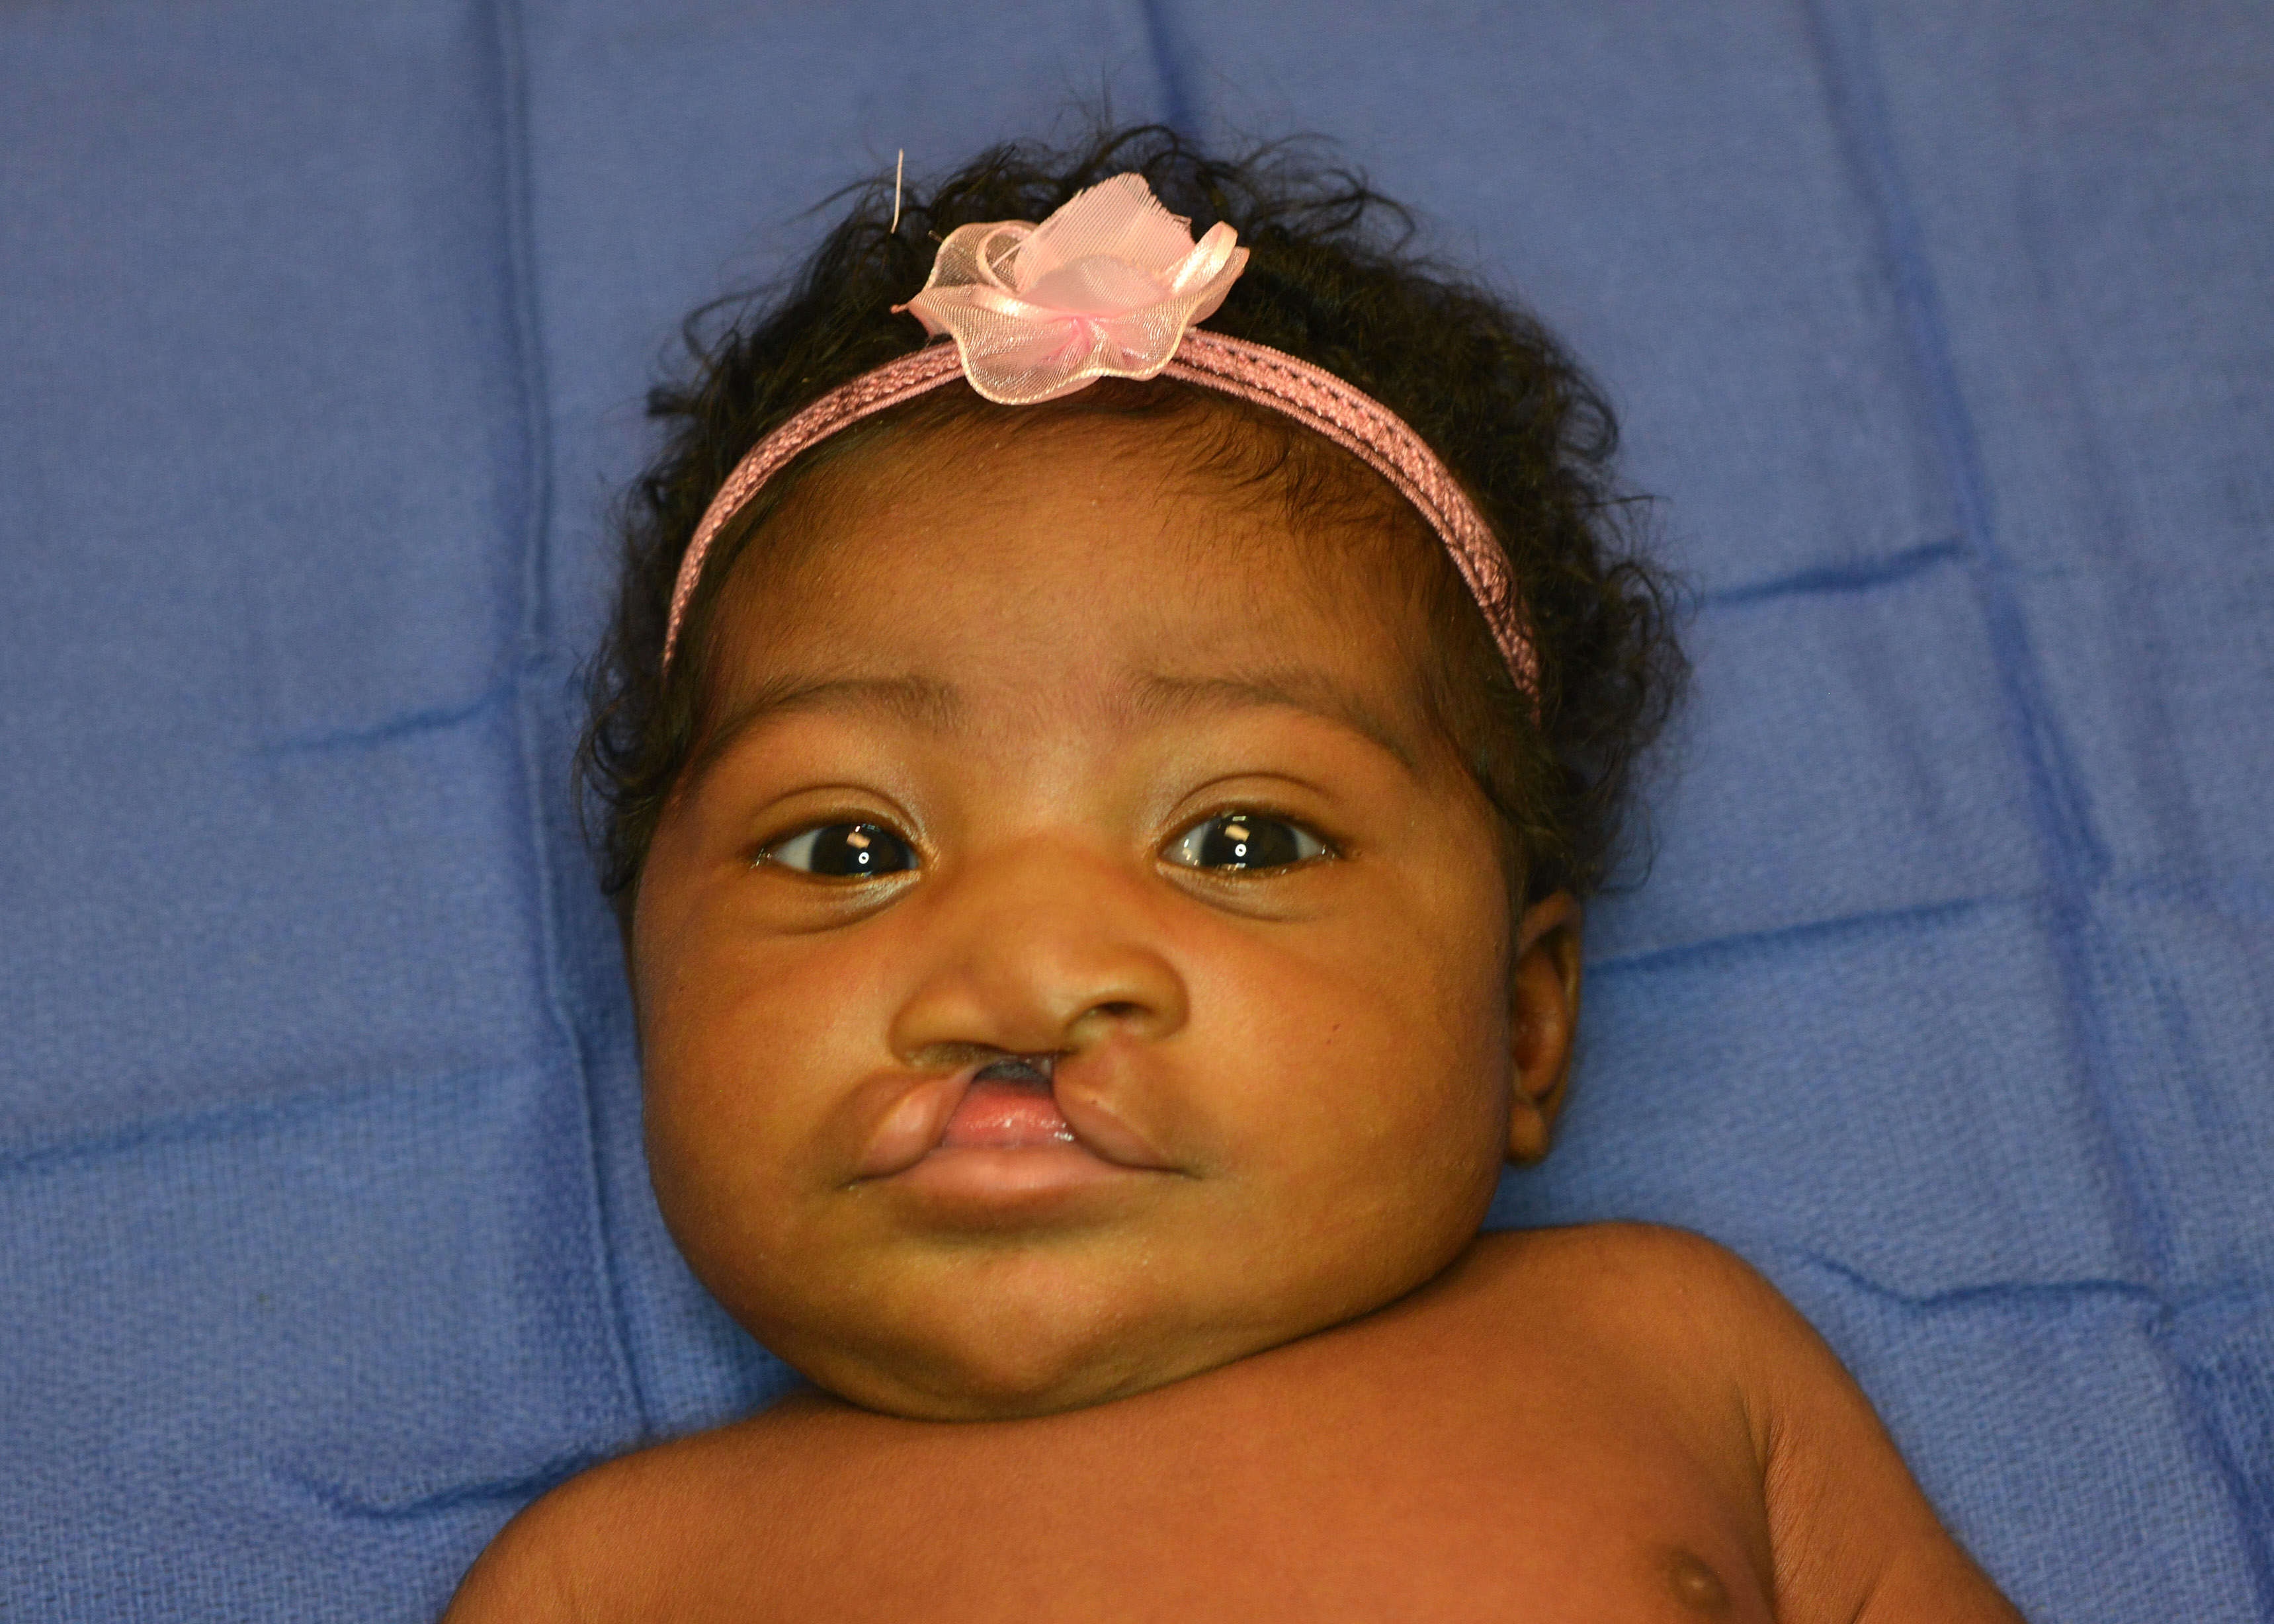 Cleft lip and cleft palate are openings or splits in the upper lip, the roof of the mouth (palate) or both. Cleft lip and cleft palate result when facial structures that are developing in an unborn baby don't close completely.